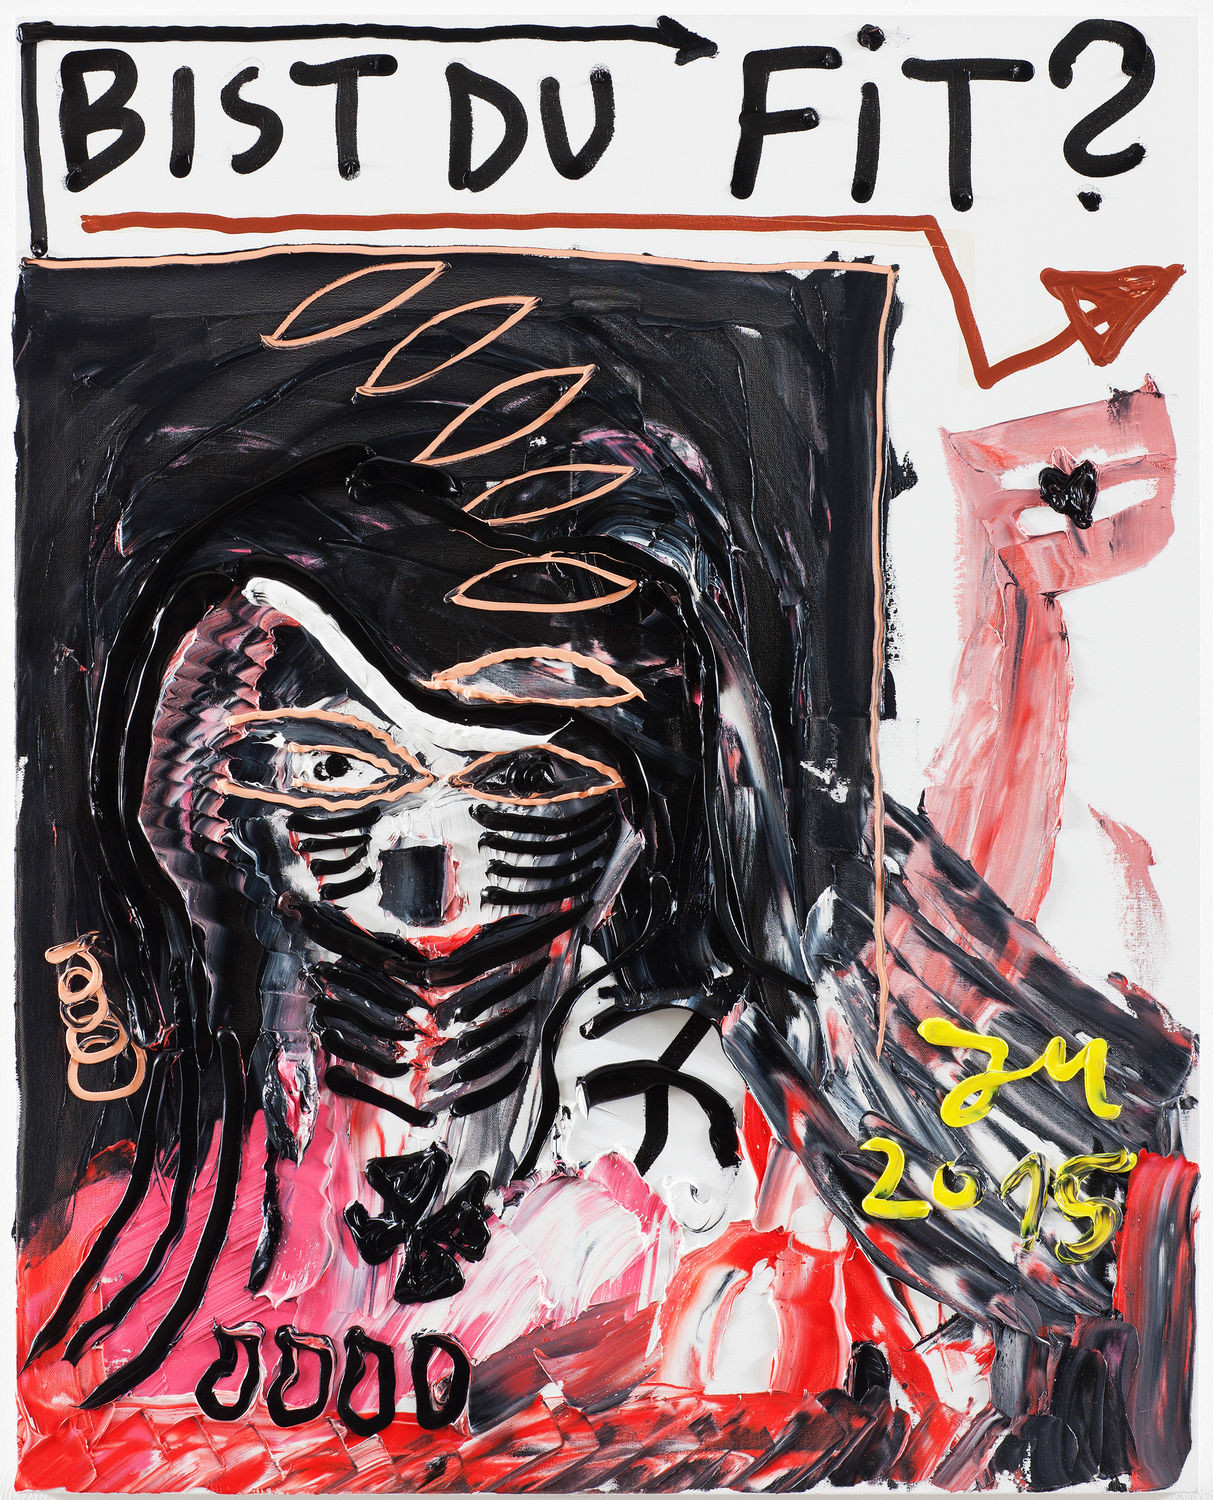 Jonathan Meese, M.O.V.E. IT, LIKE YOUR RED "REDADDY" DRESS..., 2015. Source: Galerie Krinzinger